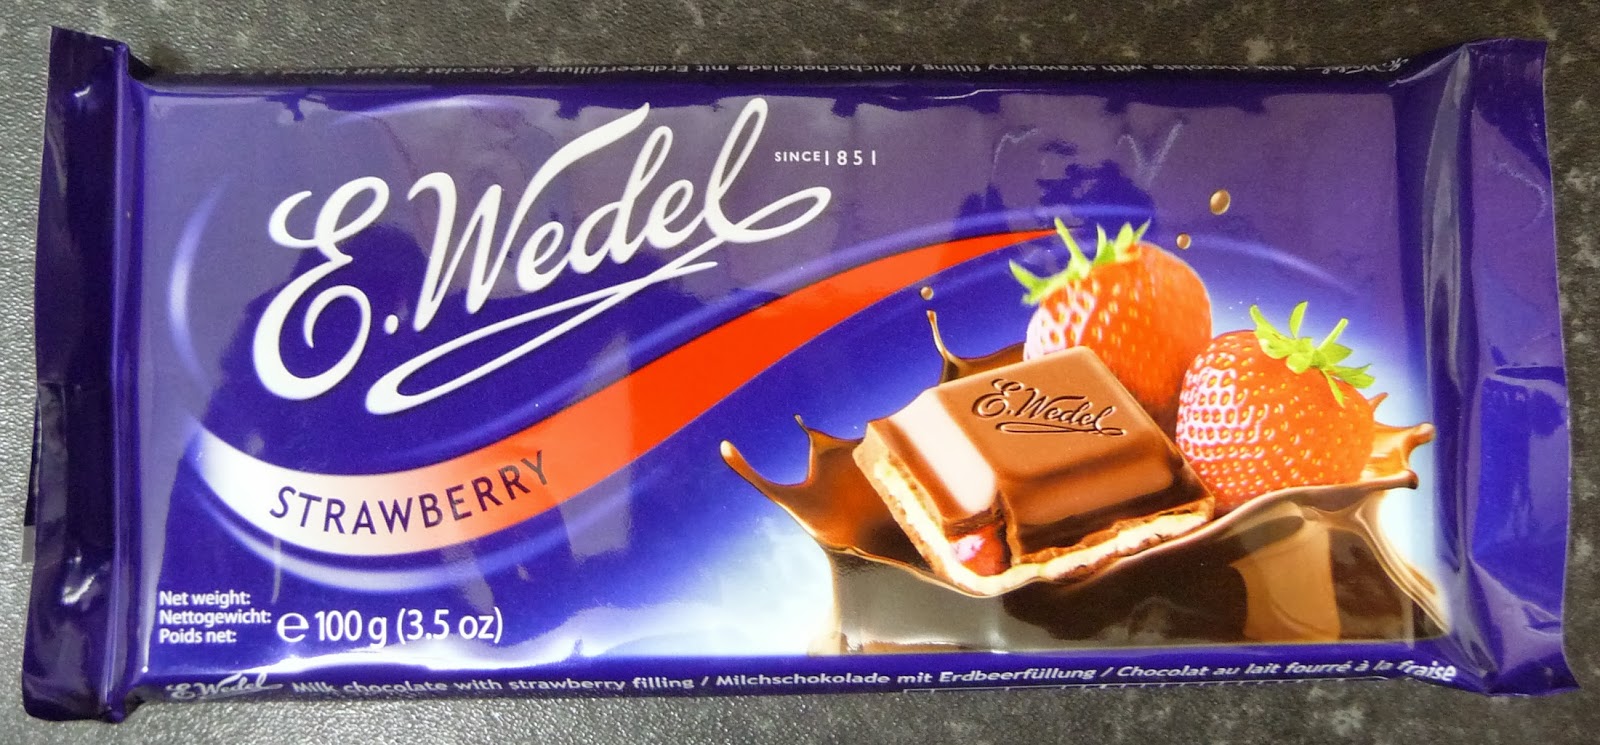 Something to look forward to: E. Wedel Strawberry